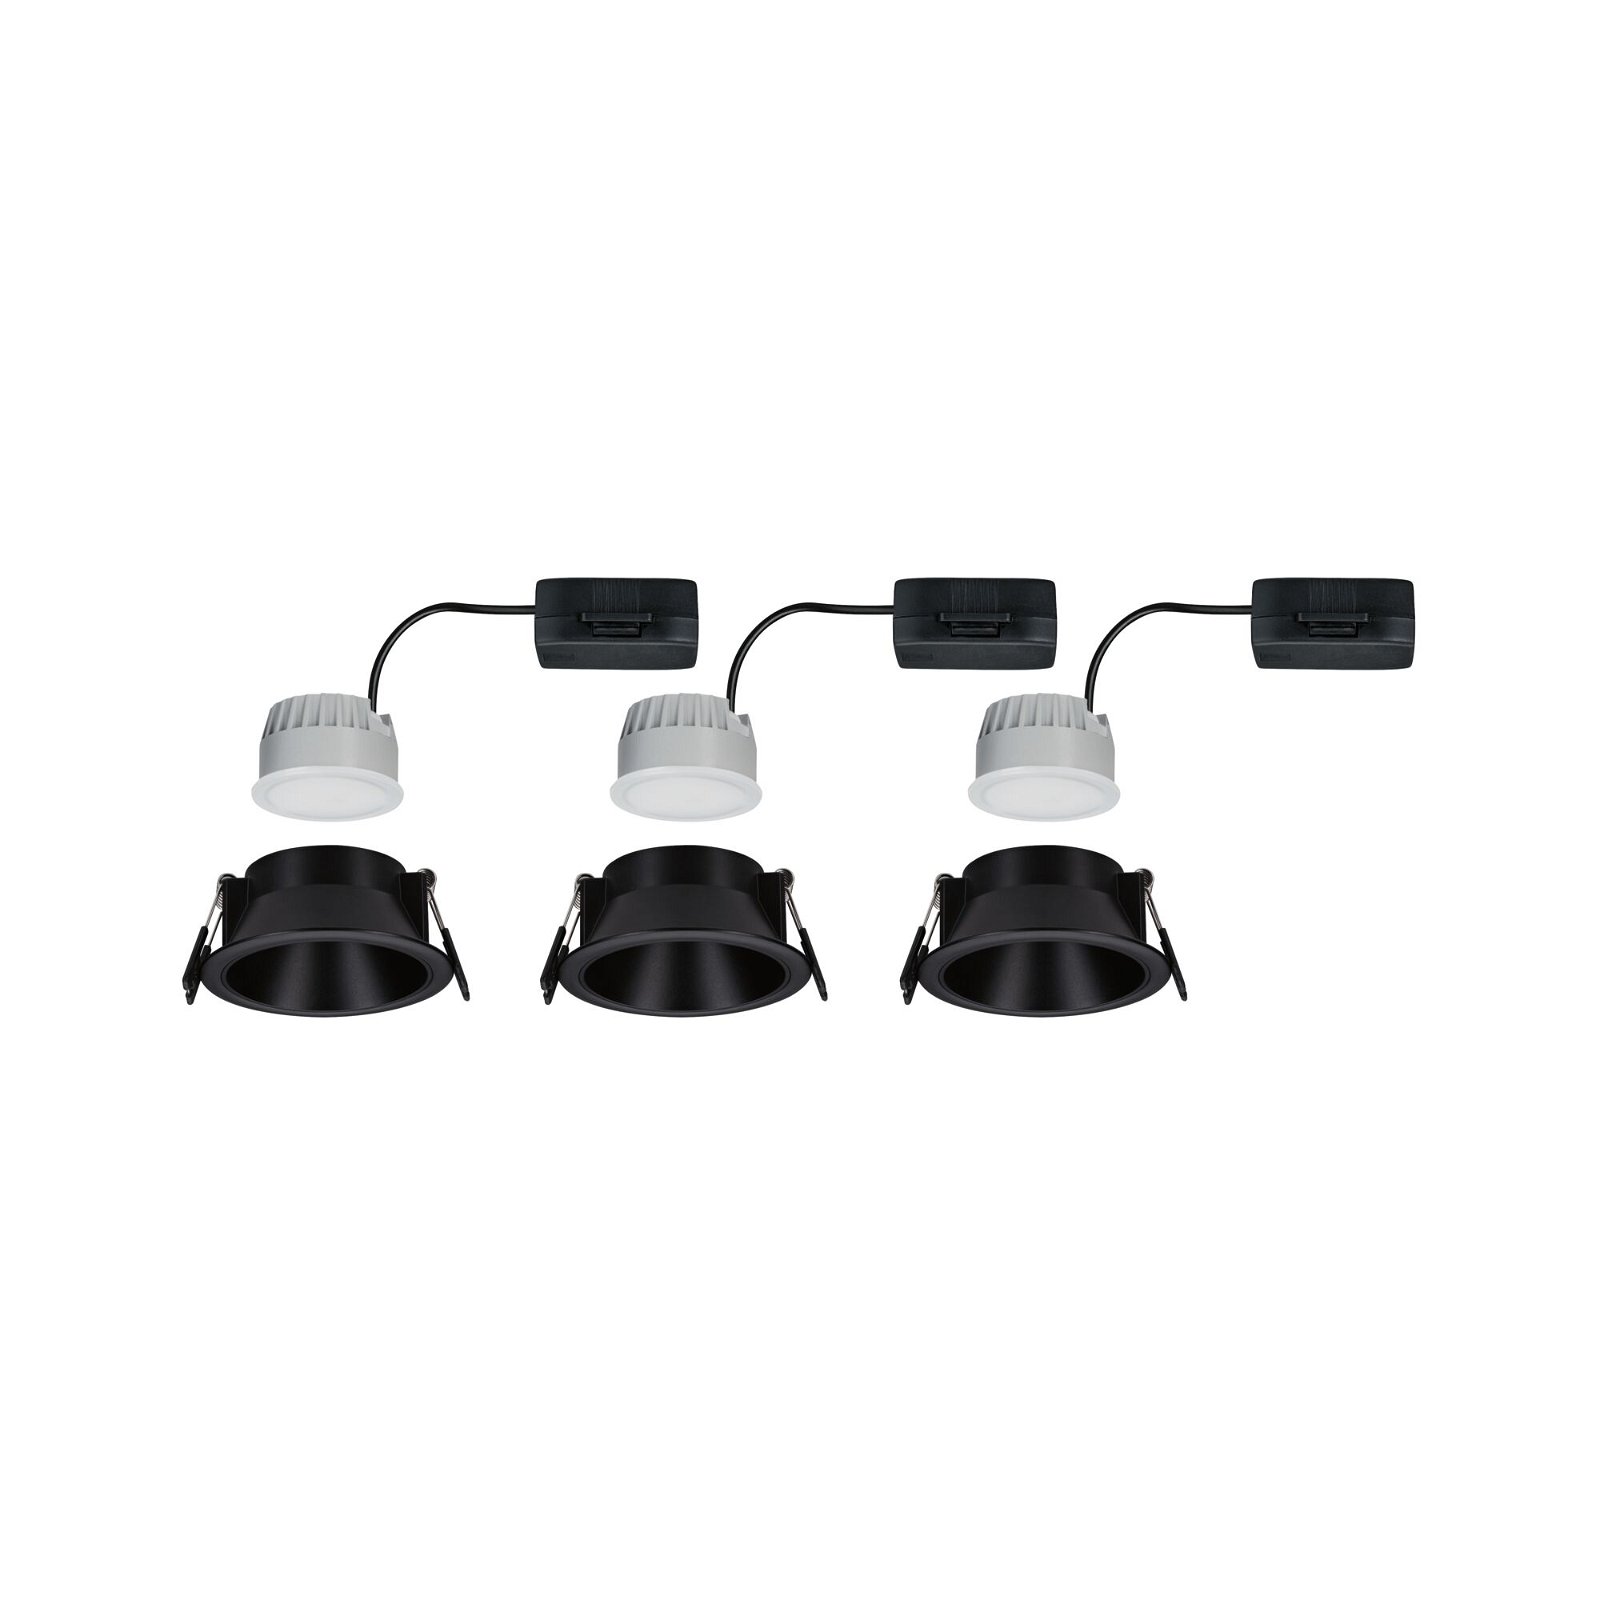 LED Recessed luminaire 3-Step-Dim Cole Coin Basic Set 3-piece set IP44 round 88mm Coin 3x6W 3x470lm 230V dimmable 2700K Black